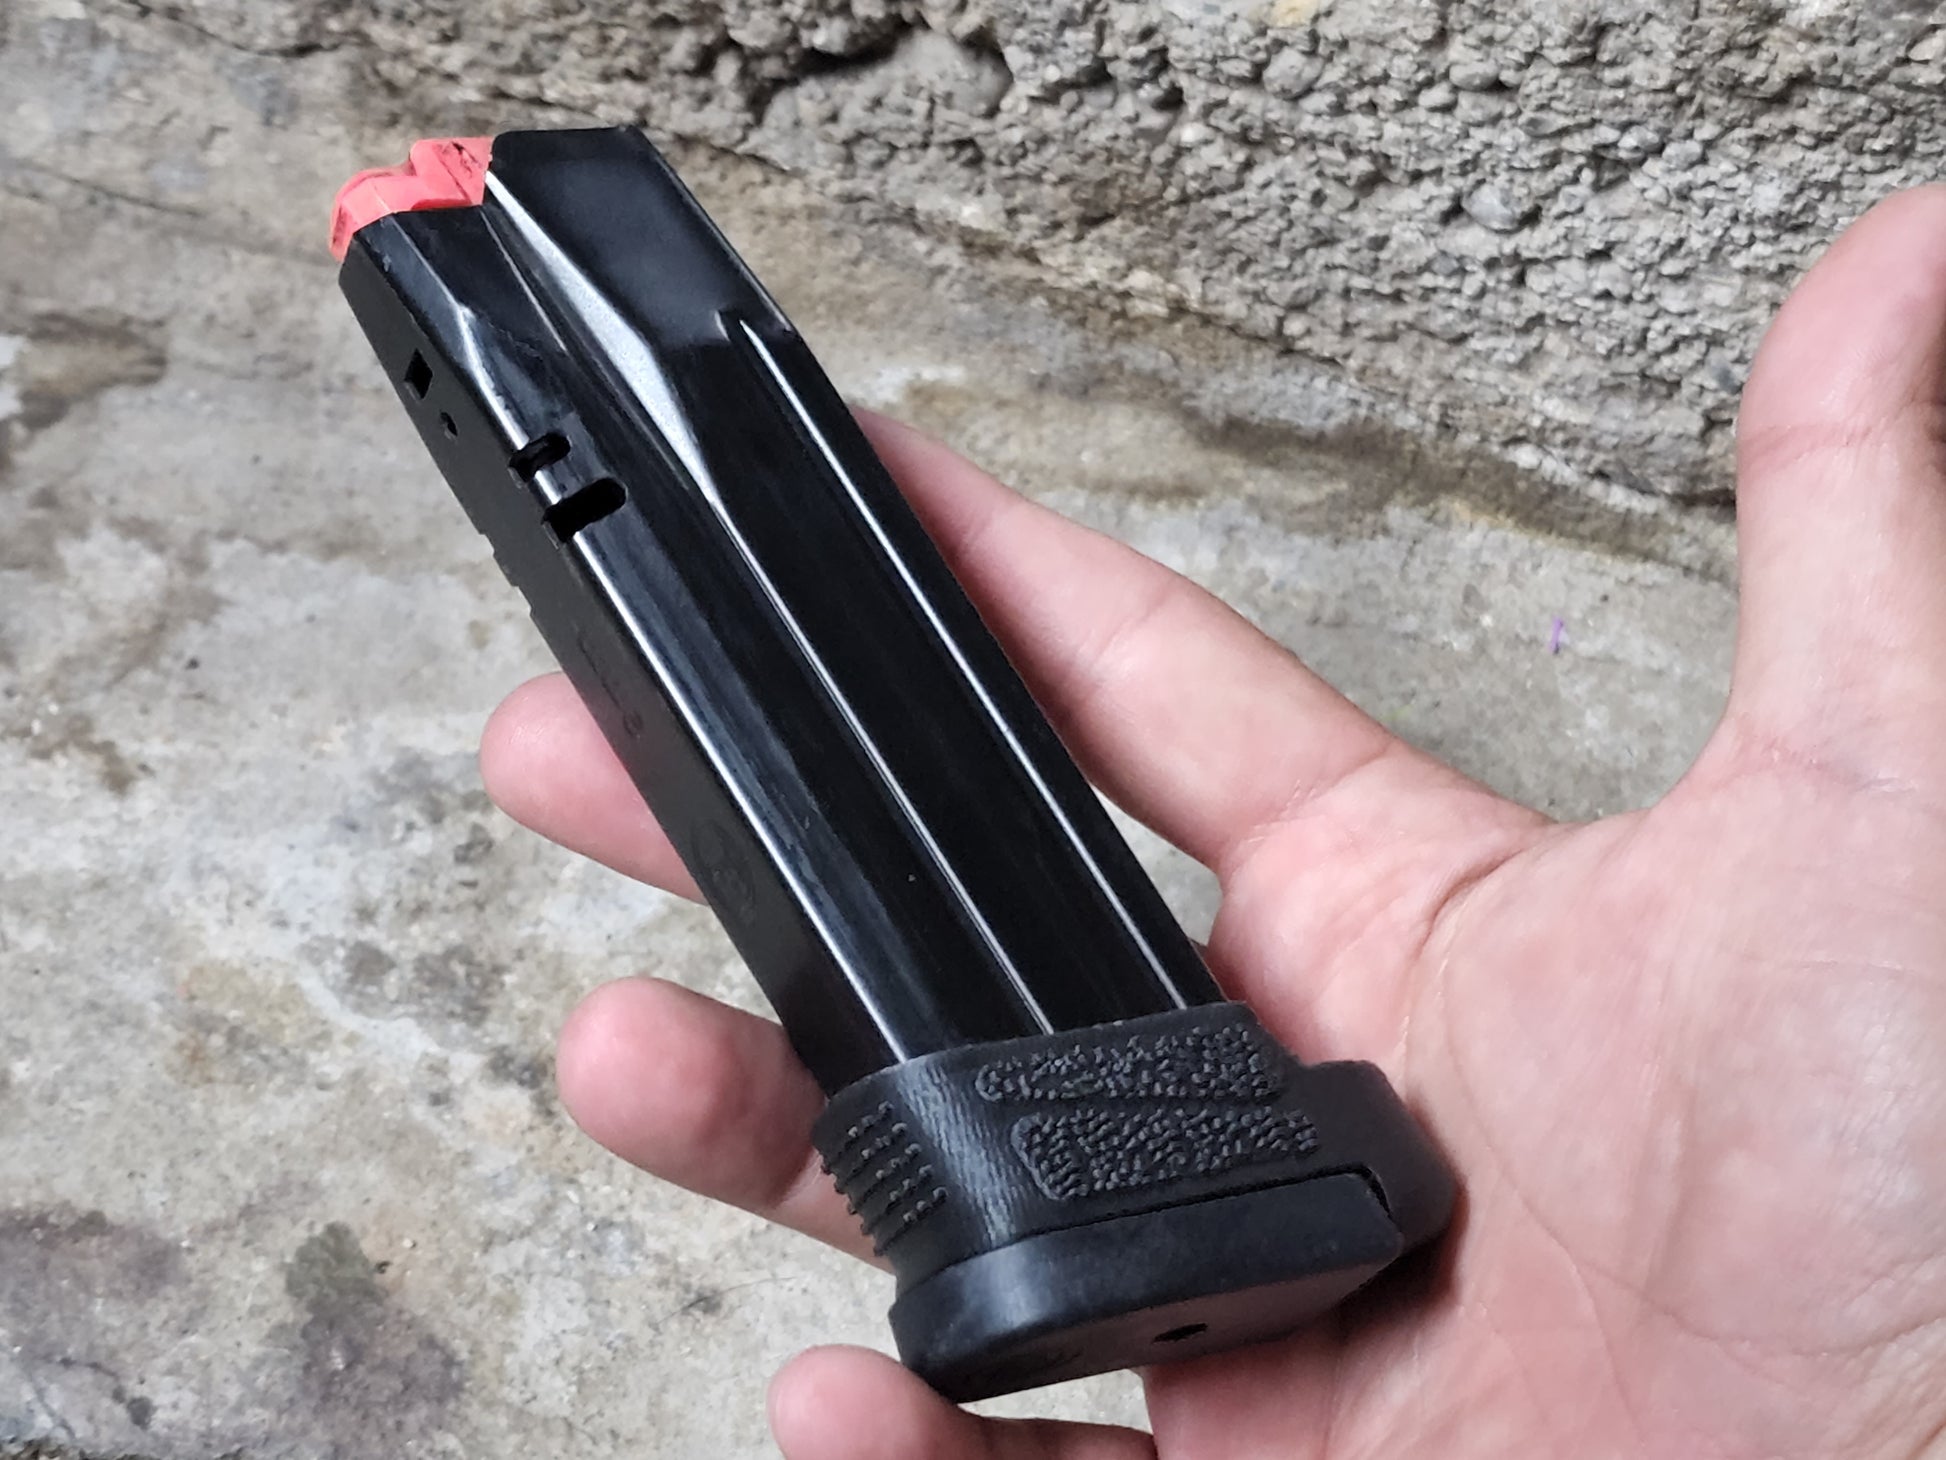 Custom designed and 3D printed adapter sleeve for the CZ P07 allowing the use of the P09 magazine